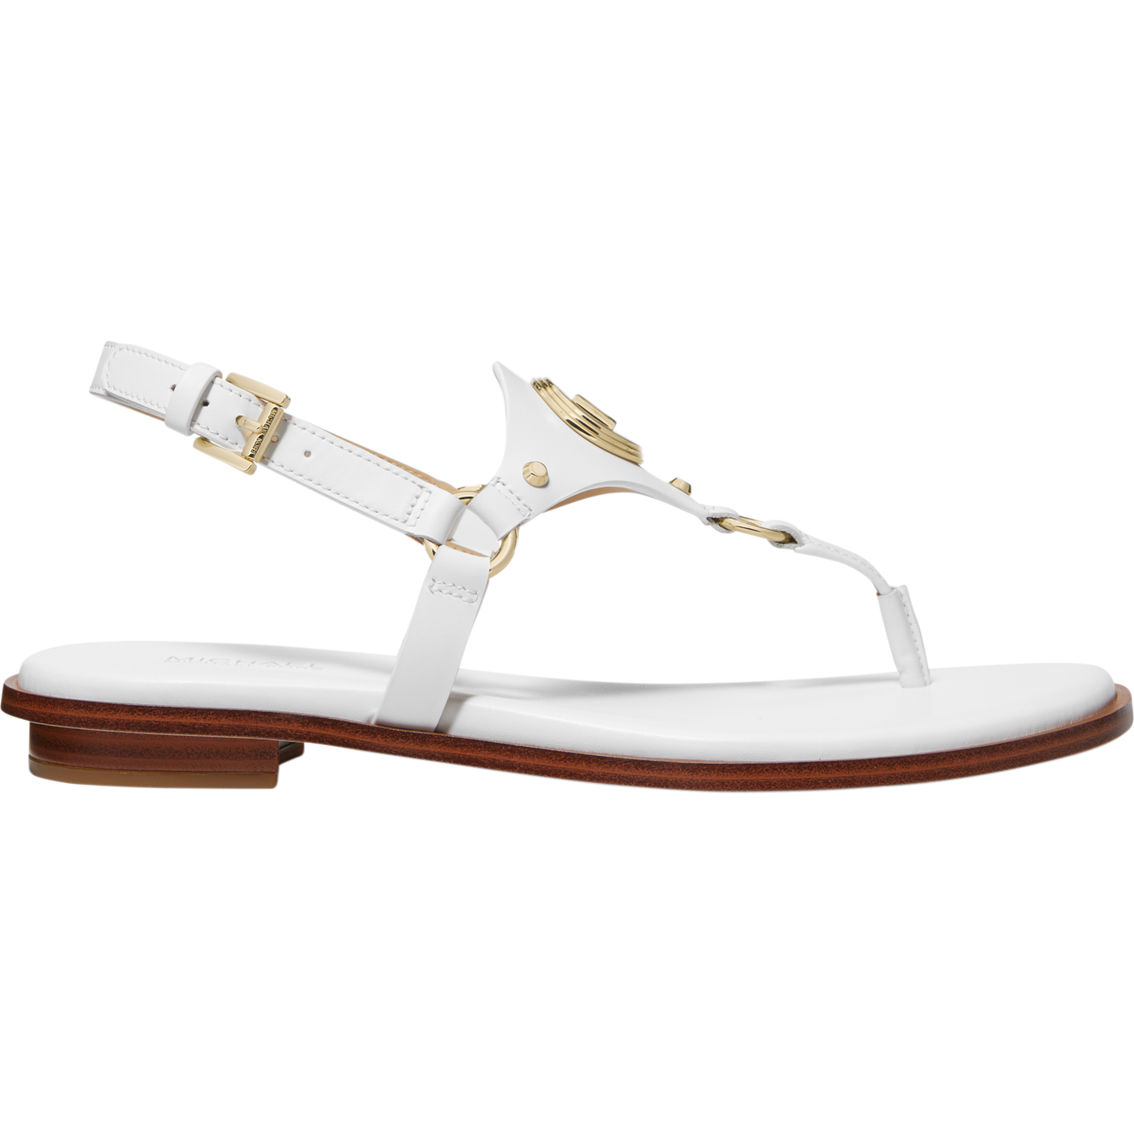 Michael Kors Casey Thong Sandals - Image 2 of 3